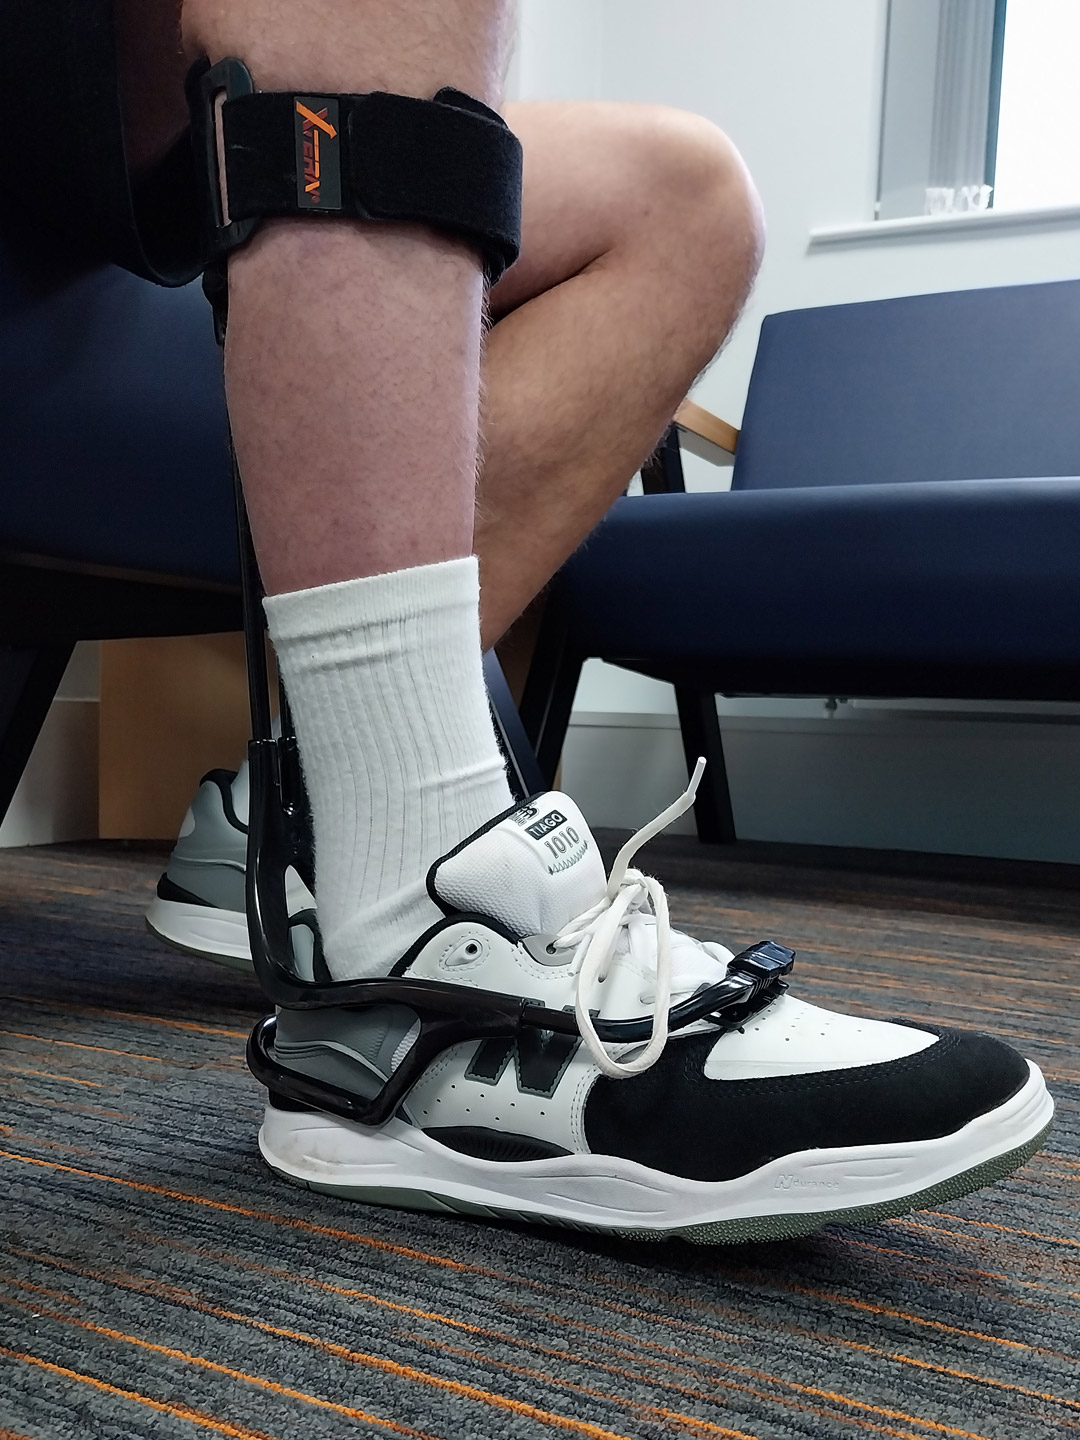 The turbomed foot drop ankle brace is perfect for Fin and his busy lifestyle.